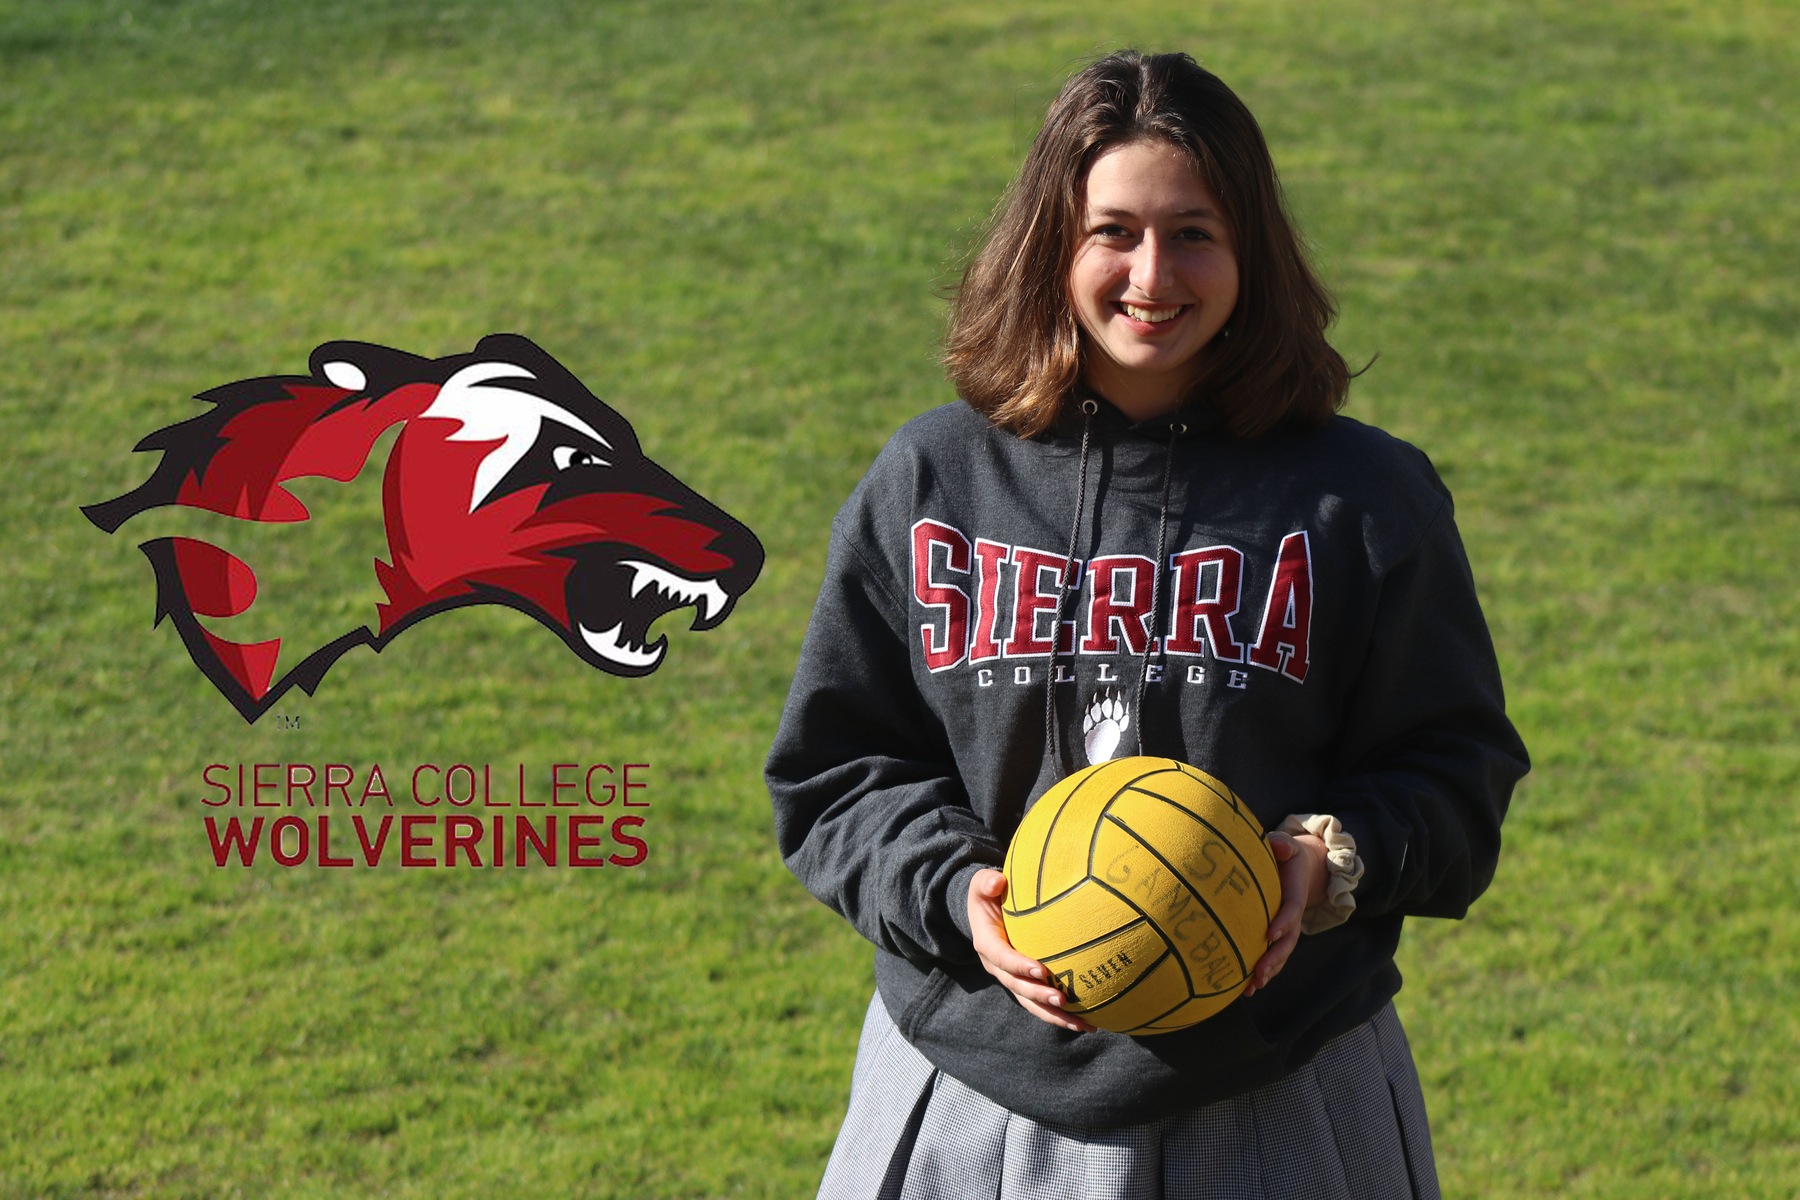 Sarah Mudd to Play Water Polo at Sierra College